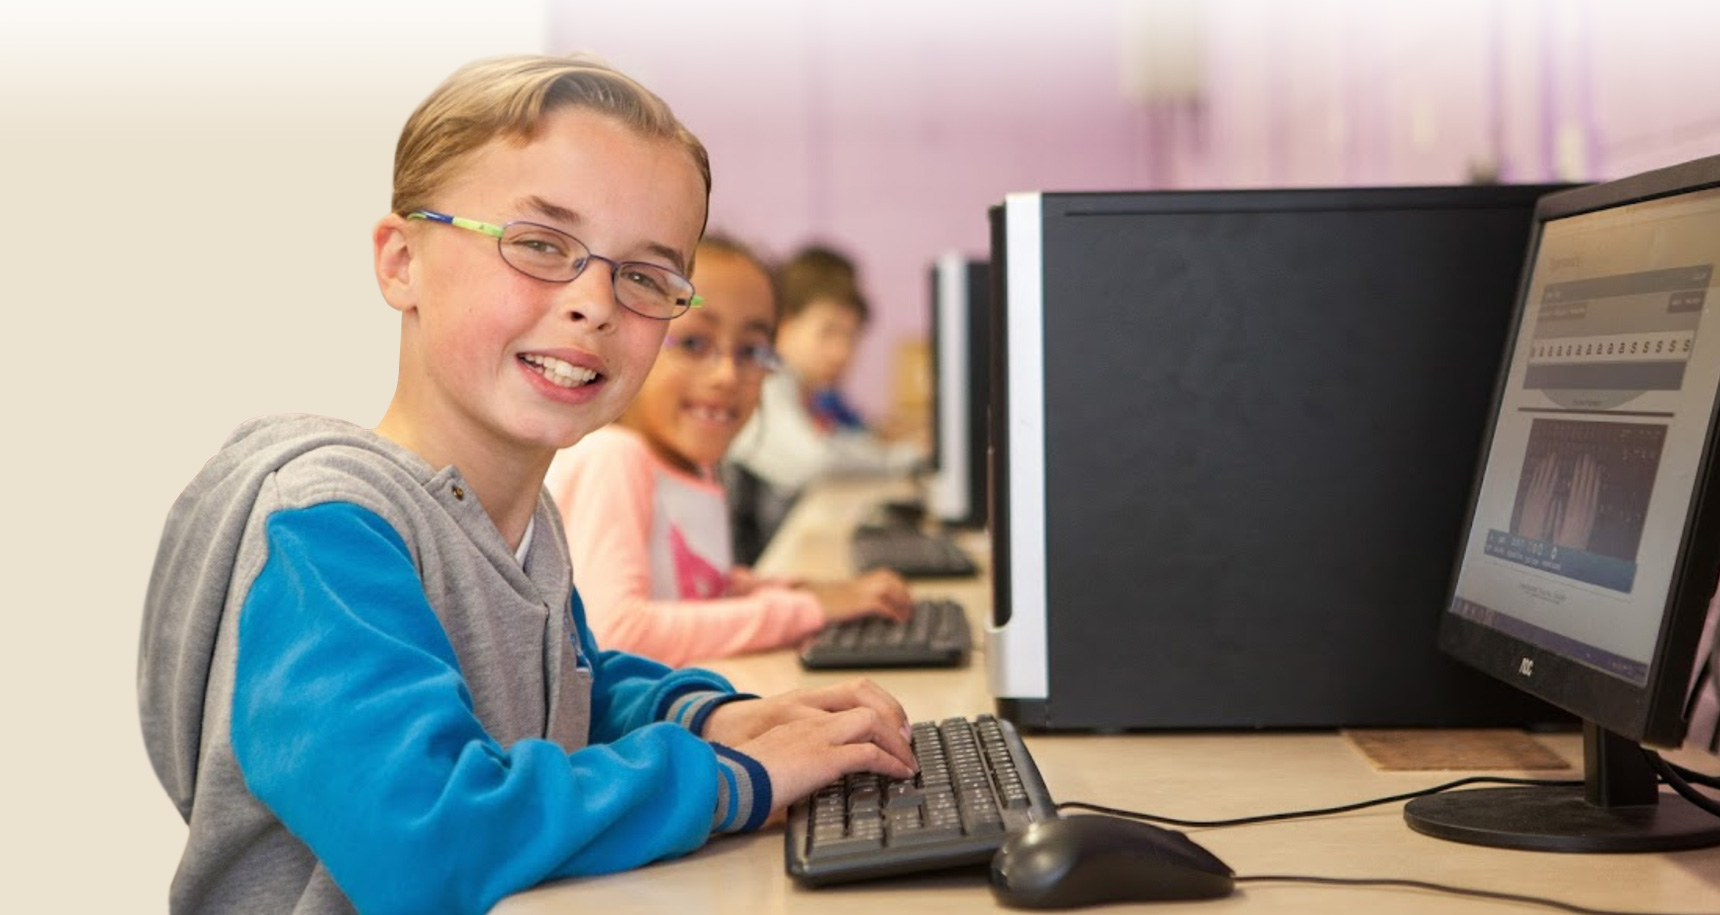 What computer skills should your child learn over the Summer months of 2016?